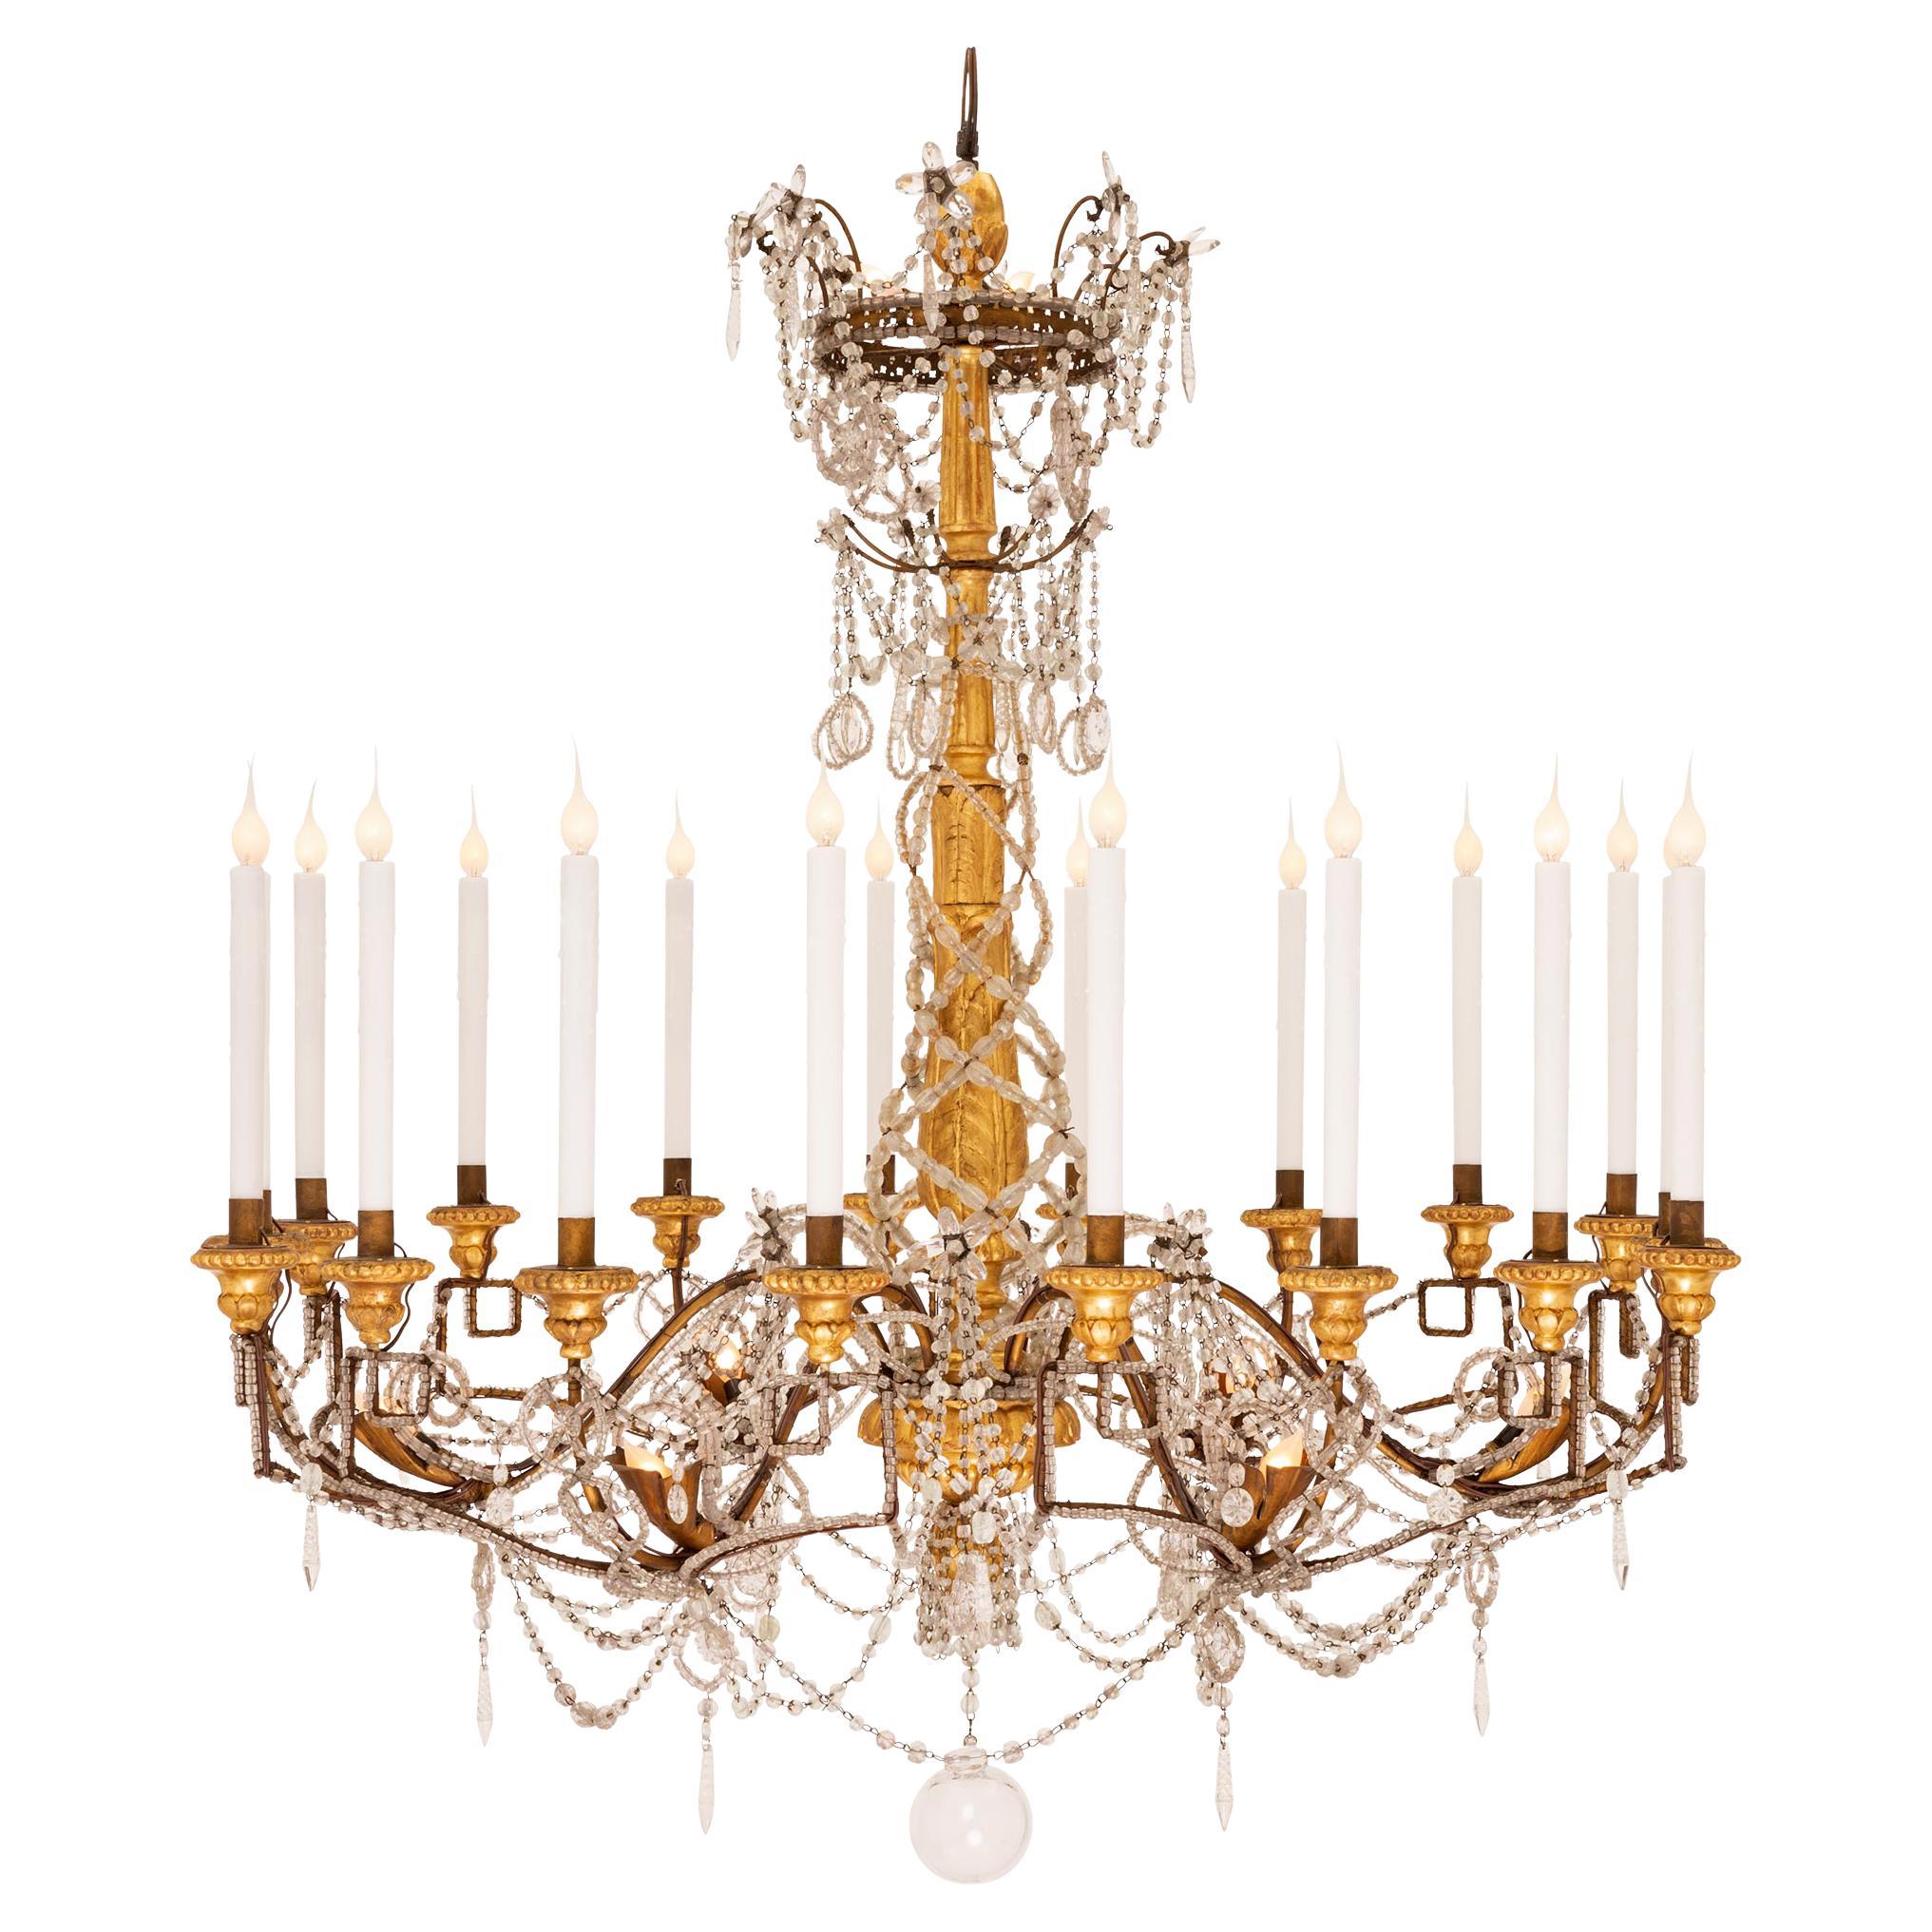 Italian 18th Century Louis XVI Period Chandelier from Turin For Sale